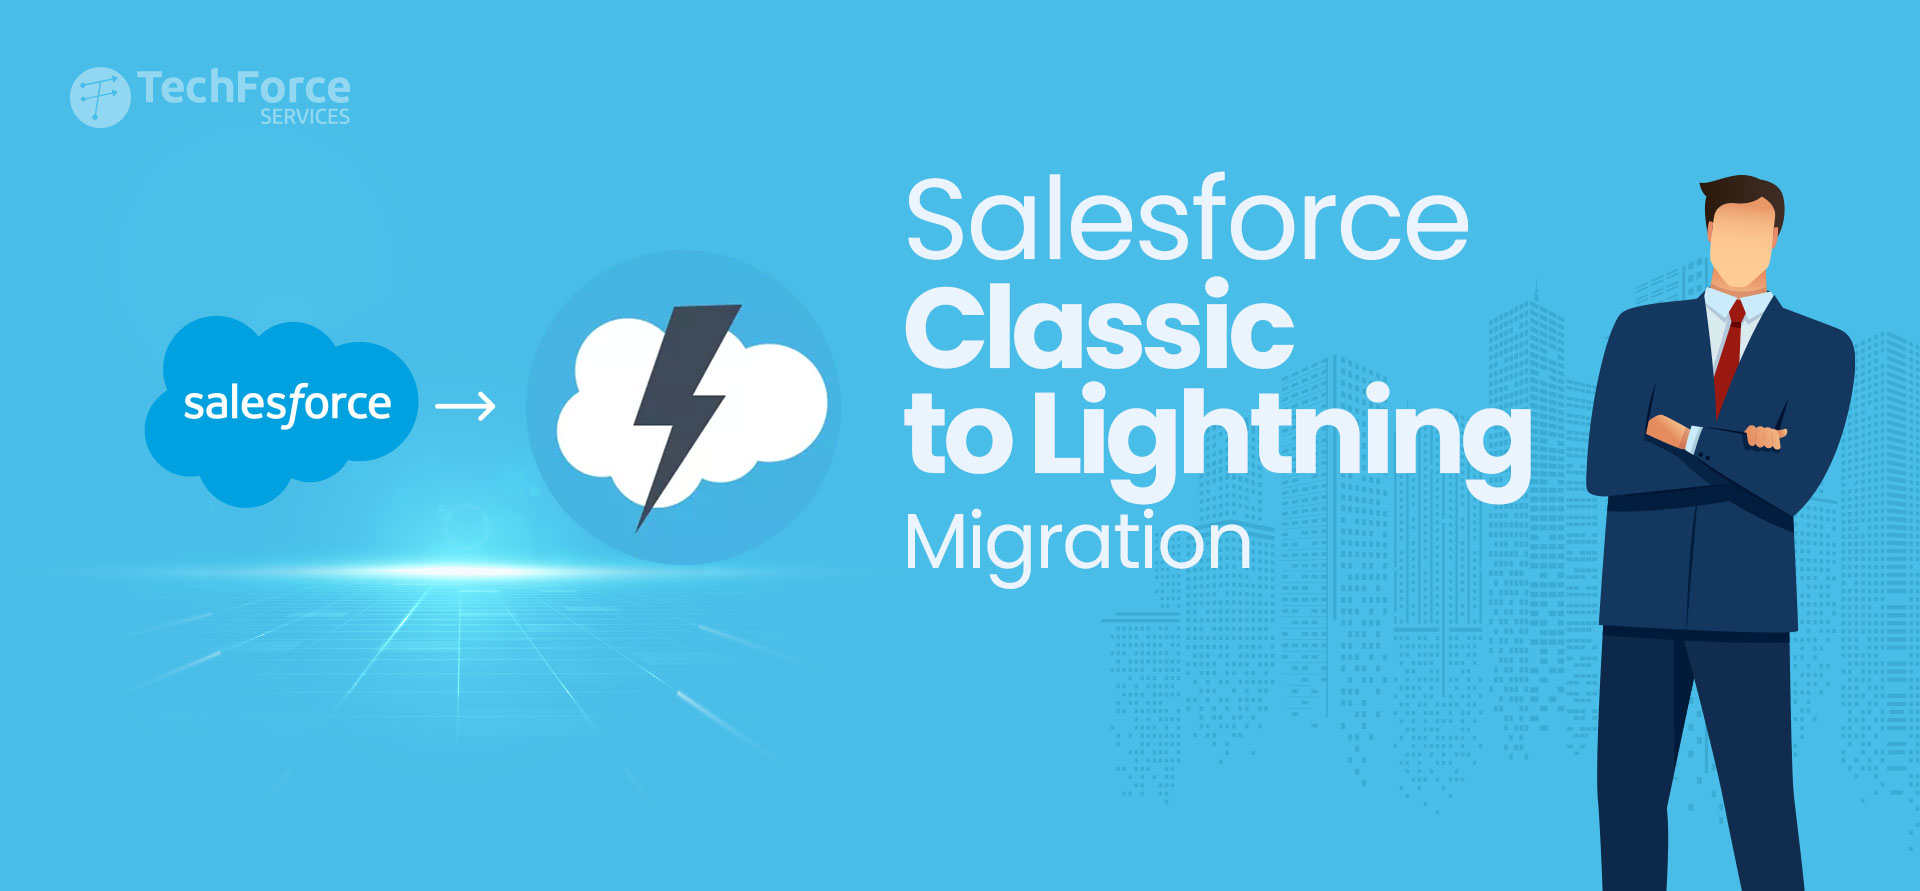 Why-Salesforce-Classic-to-Lightning-Migration-is-Critical-for-Businesses